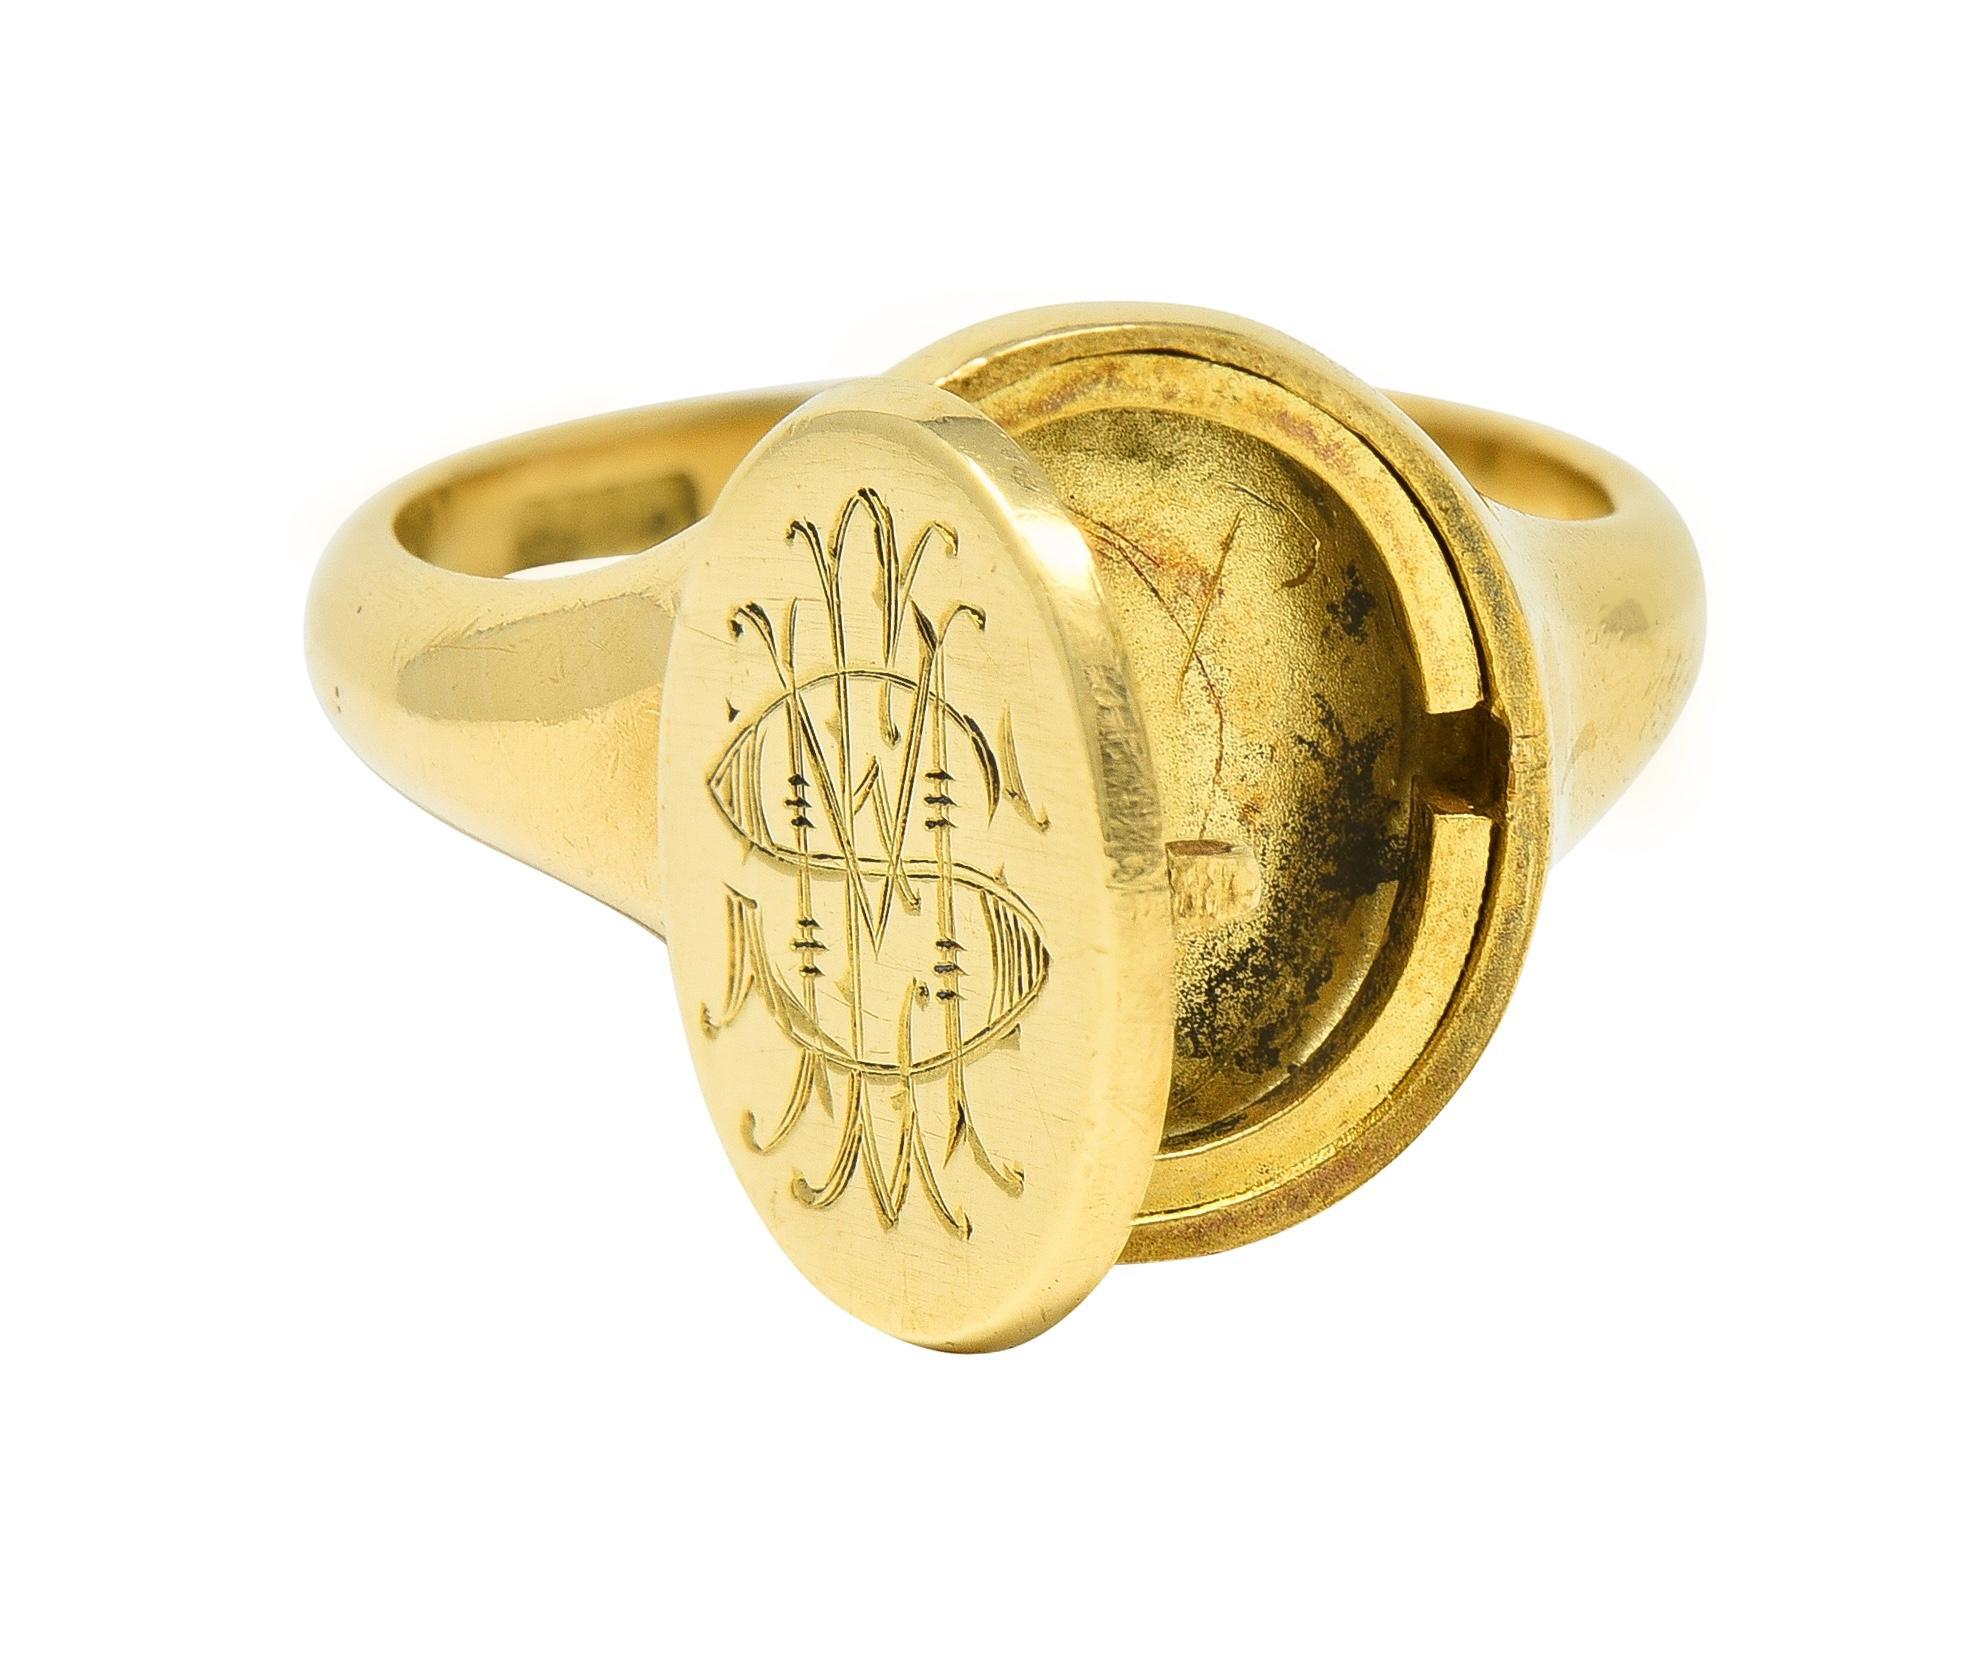 Antique 18 Karat Yellow Gold Monogram Signet Poison Hidden Compartment Ring In Excellent Condition For Sale In Philadelphia, PA